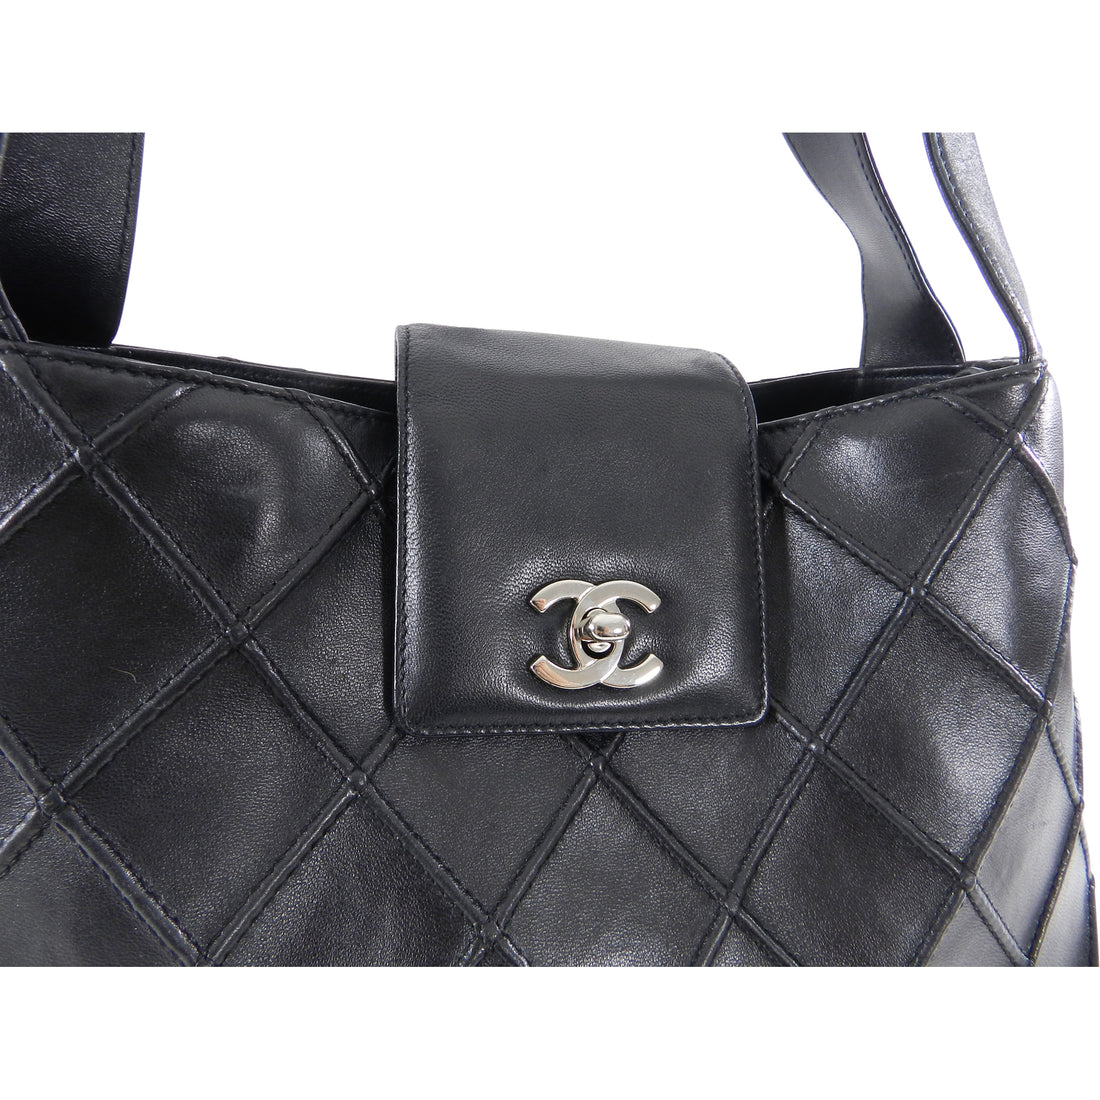 Chanel Cosmos Black Calf Leather Quilted Shoulder Bag